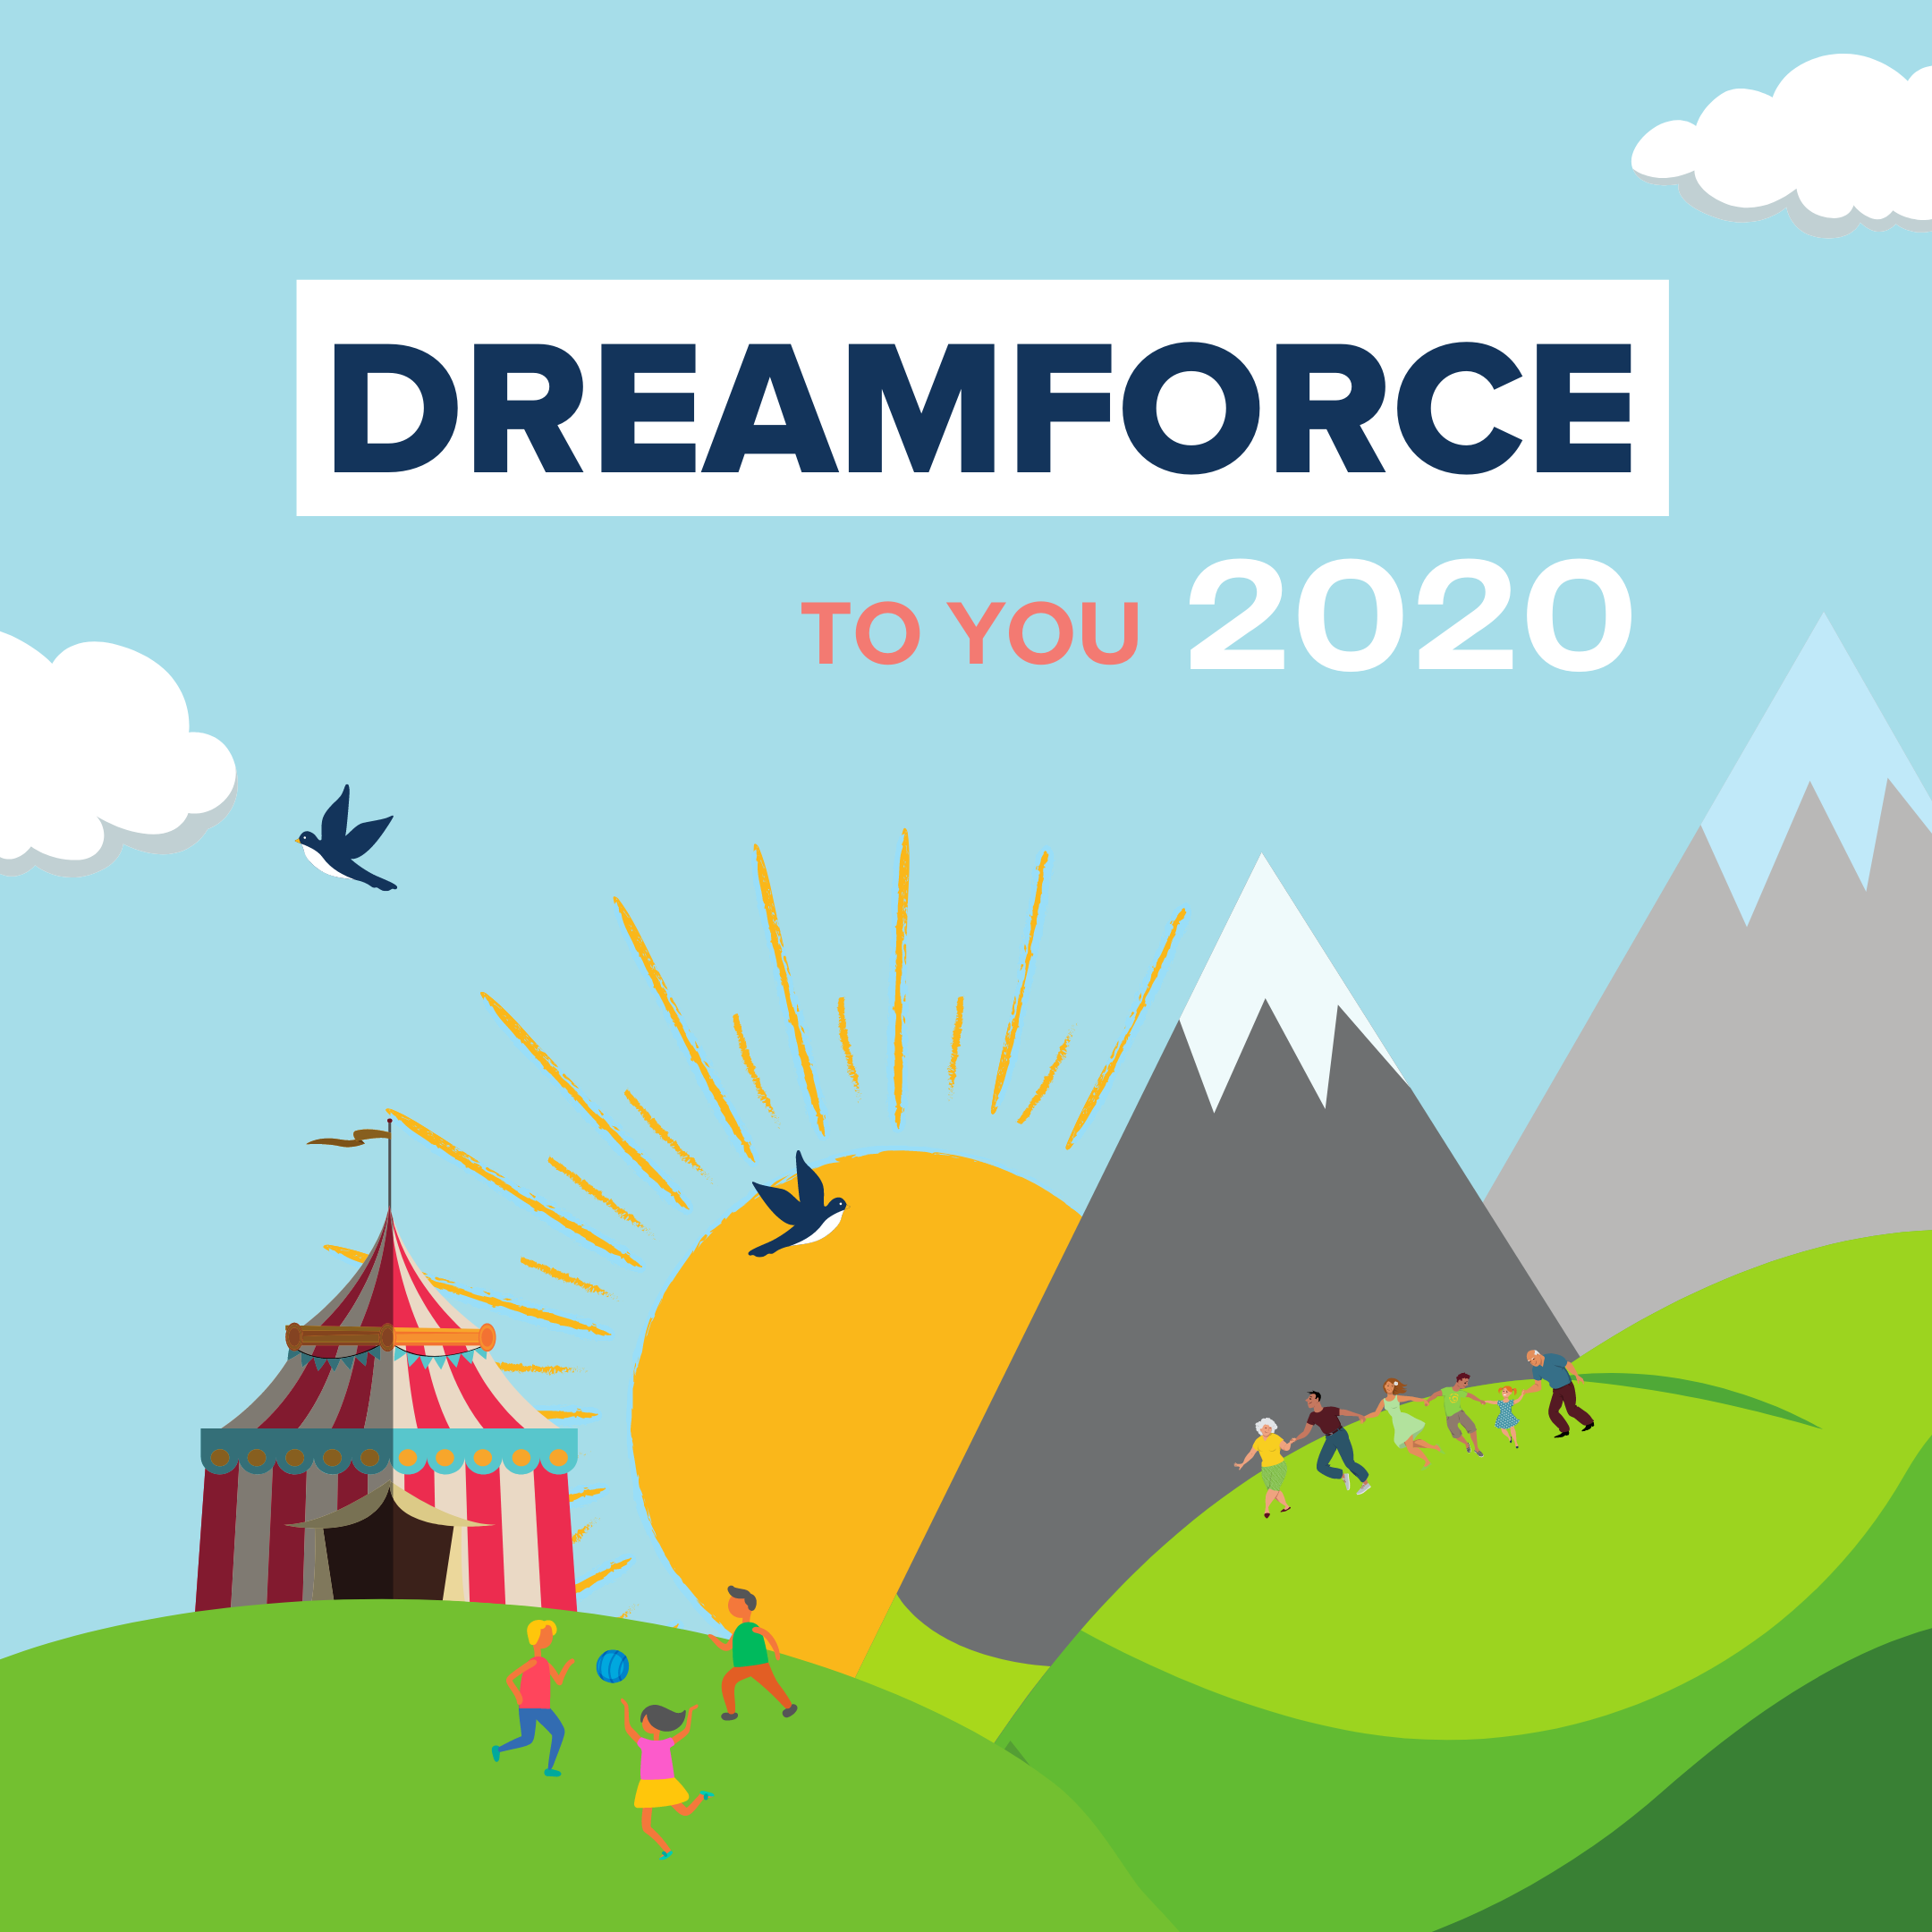 Dreamforce to you 2020